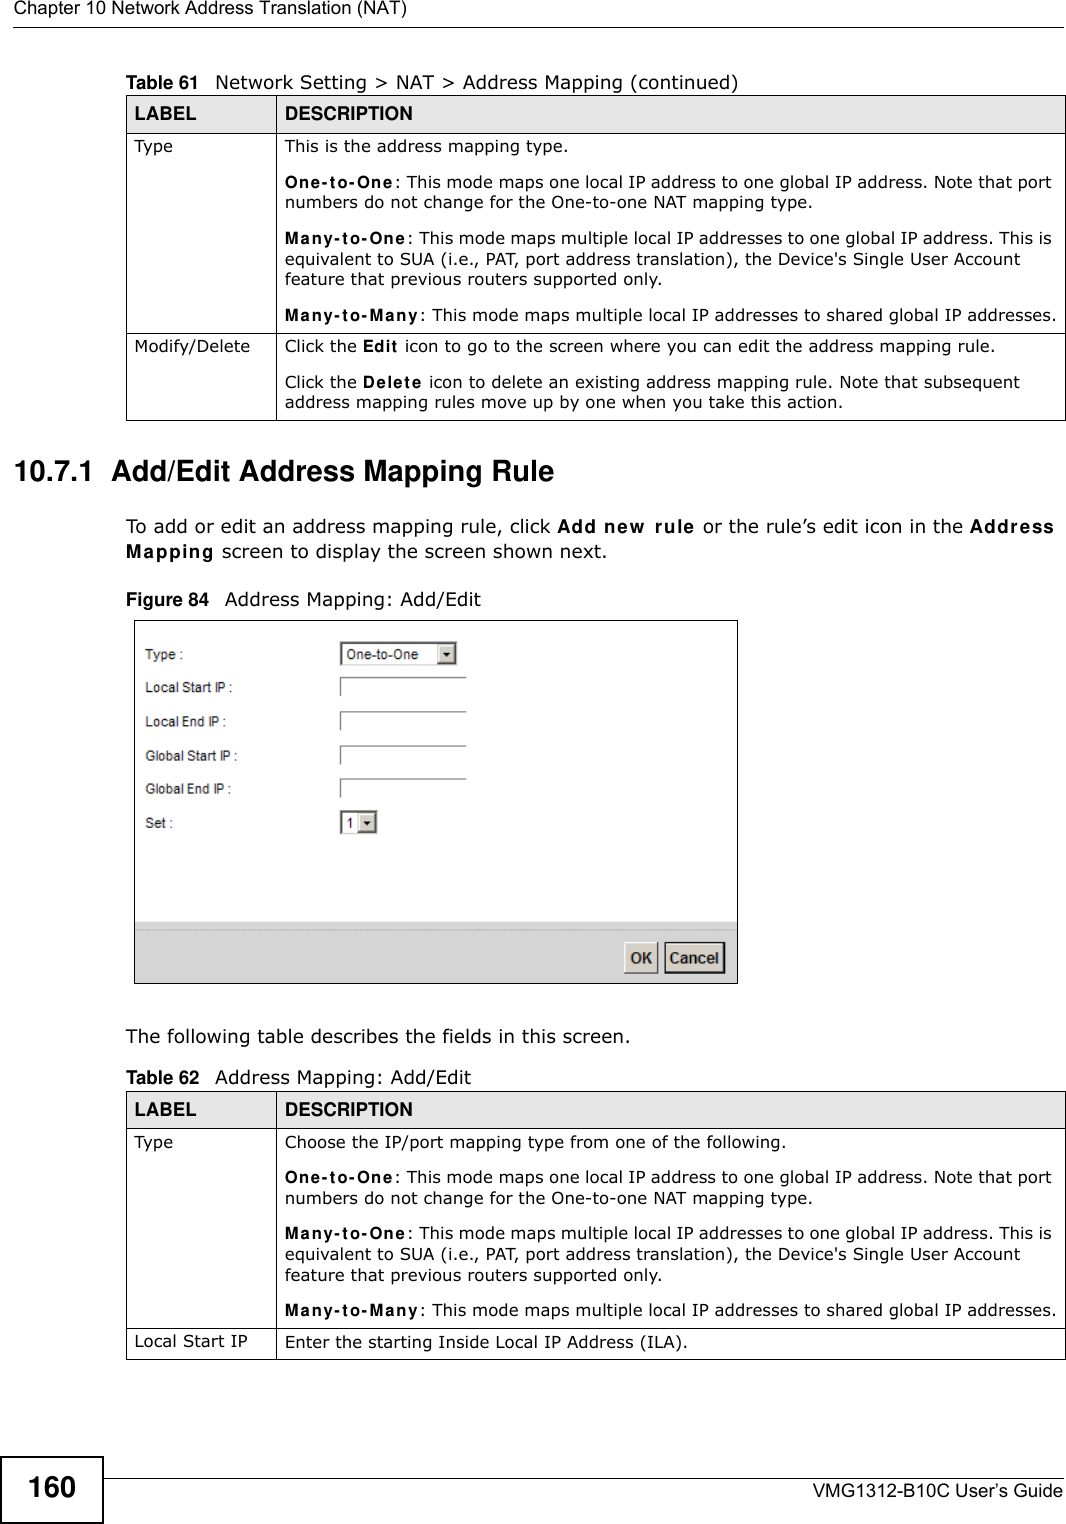 Chapter 10 Network Address Translation (NAT)VMG1312-B10C User’s Guide16010.7.1  Add/Edit Address Mapping RuleTo add or edit an address mapping rule, click Add ne w  rule or the rule’s edit icon in the Addr e ss Ma pping screen to display the screen shown next. Figure 84   Address Mapping: Add/EditThe following table describes the fields in this screen.Type This is the address mapping type.On e- t o- One : This mode maps one local IP address to one global IP address. Note that port numbers do not change for the One-to-one NAT mapping type.M a ny - t o- O ne : This mode maps multiple local IP addresses to one global IP address. This is equivalent to SUA (i.e., PAT, port address translation), the Device&apos;s Single User Account feature that previous routers supported only. M a ny - t o- M a n y: This mode maps multiple local IP addresses to shared global IP addresses.Modify/Delete Click the Edit  icon to go to the screen where you can edit the address mapping rule.Click the D e let e  icon to delete an existing address mapping rule. Note that subsequent address mapping rules move up by one when you take this action.Table 61   Network Setting &gt; NAT &gt; Address Mapping (continued)LABEL DESCRIPTIONTable 62   Address Mapping: Add/EditLABEL DESCRIPTIONType Choose the IP/port mapping type from one of the following.On e- t o- One : This mode maps one local IP address to one global IP address. Note that port numbers do not change for the One-to-one NAT mapping type.M a ny - t o- O ne : This mode maps multiple local IP addresses to one global IP address. This is equivalent to SUA (i.e., PAT, port address translation), the Device&apos;s Single User Account feature that previous routers supported only. M a ny - t o- M a n y: This mode maps multiple local IP addresses to shared global IP addresses.Local Start IP Enter the starting Inside Local IP Address (ILA).